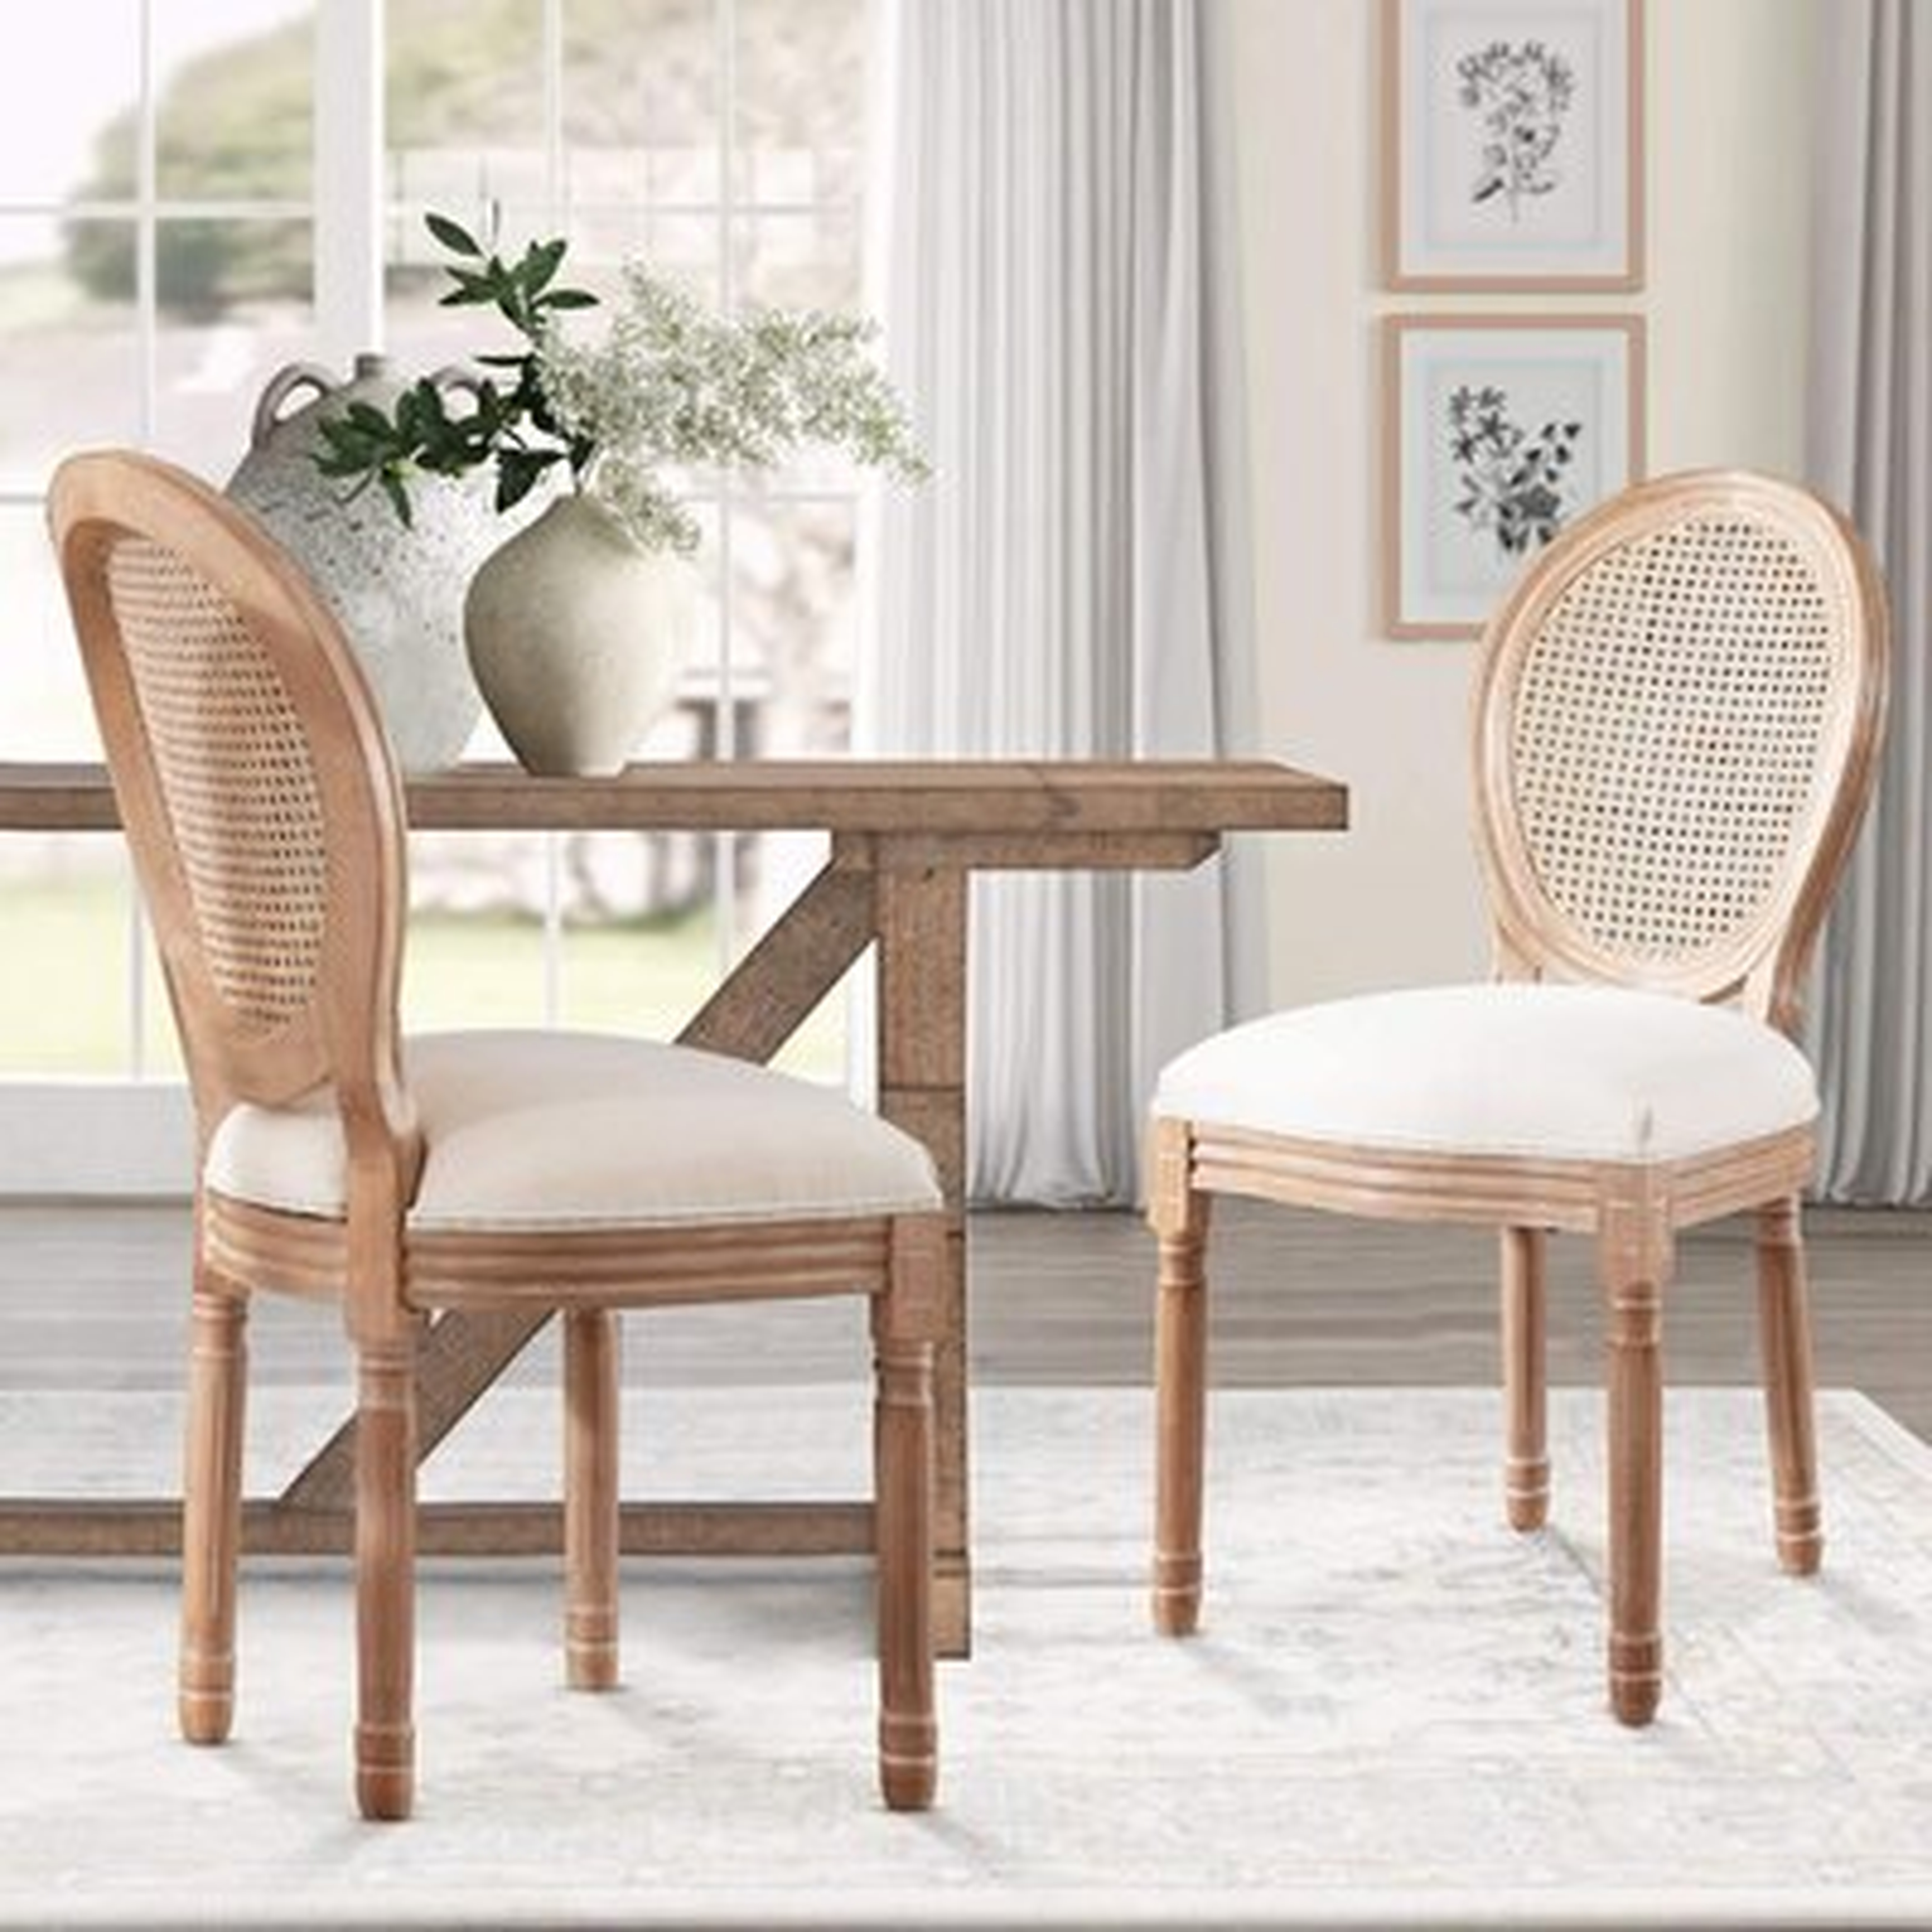 French Retro Dining Chair Set, Upholstered Accent Makeup Chair, Mid Century Fabric Side Chairs, Farmhouse Distressed Wood Chairs With Cane Mesh Round Back For Bedroom, Dining Room, Living Room, Kitchen, Set Of 2 - Wayfair